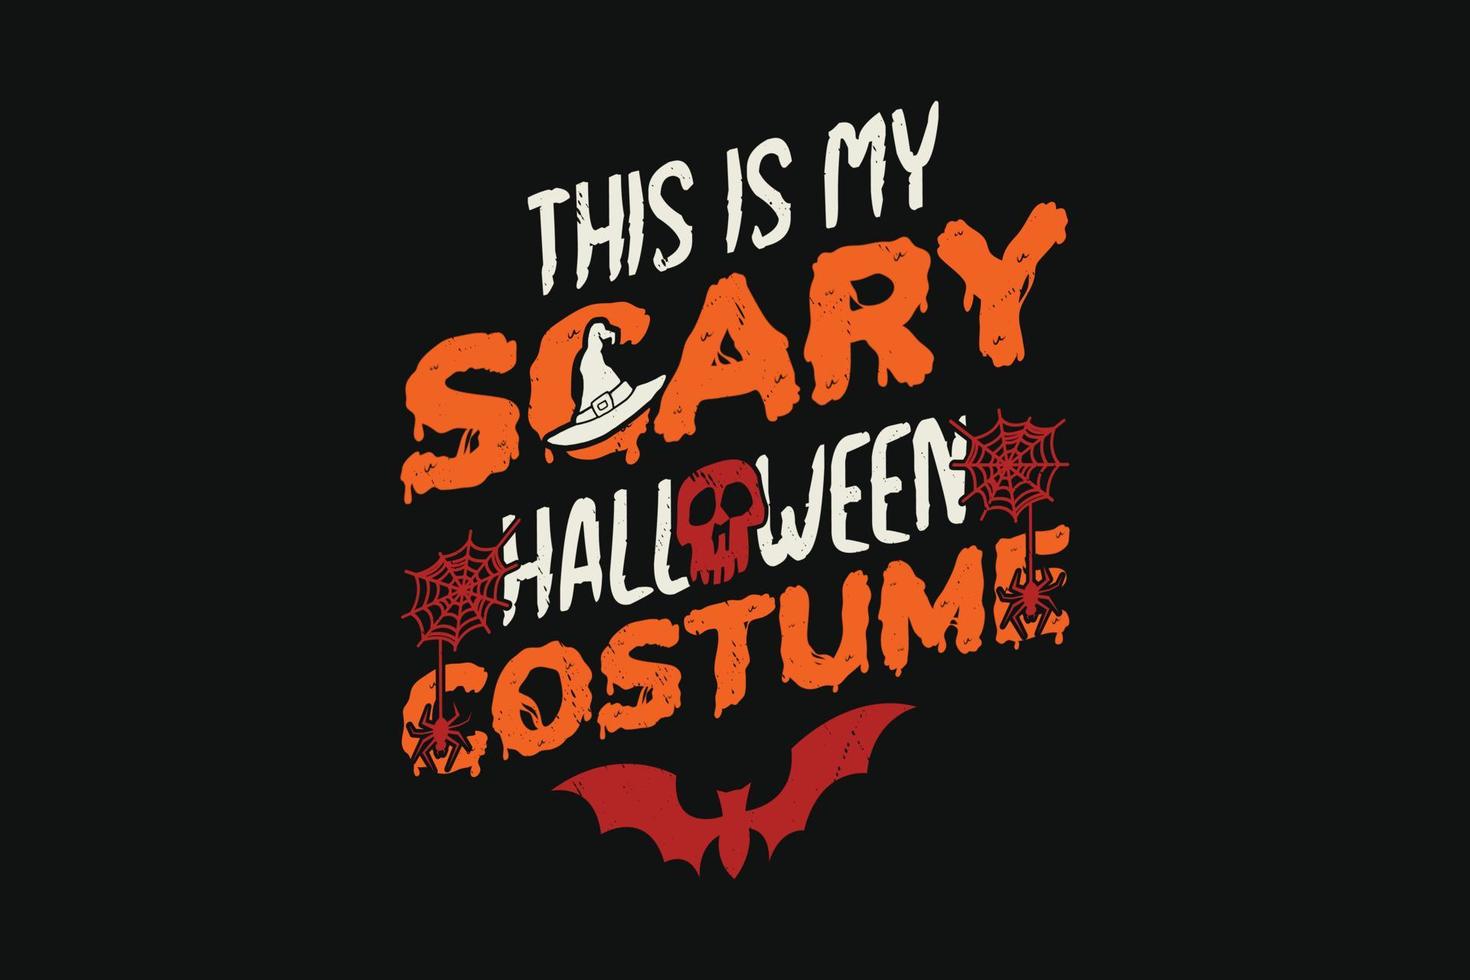 Halloween T-shirt Design This Is My Scary Halloween Costume vector